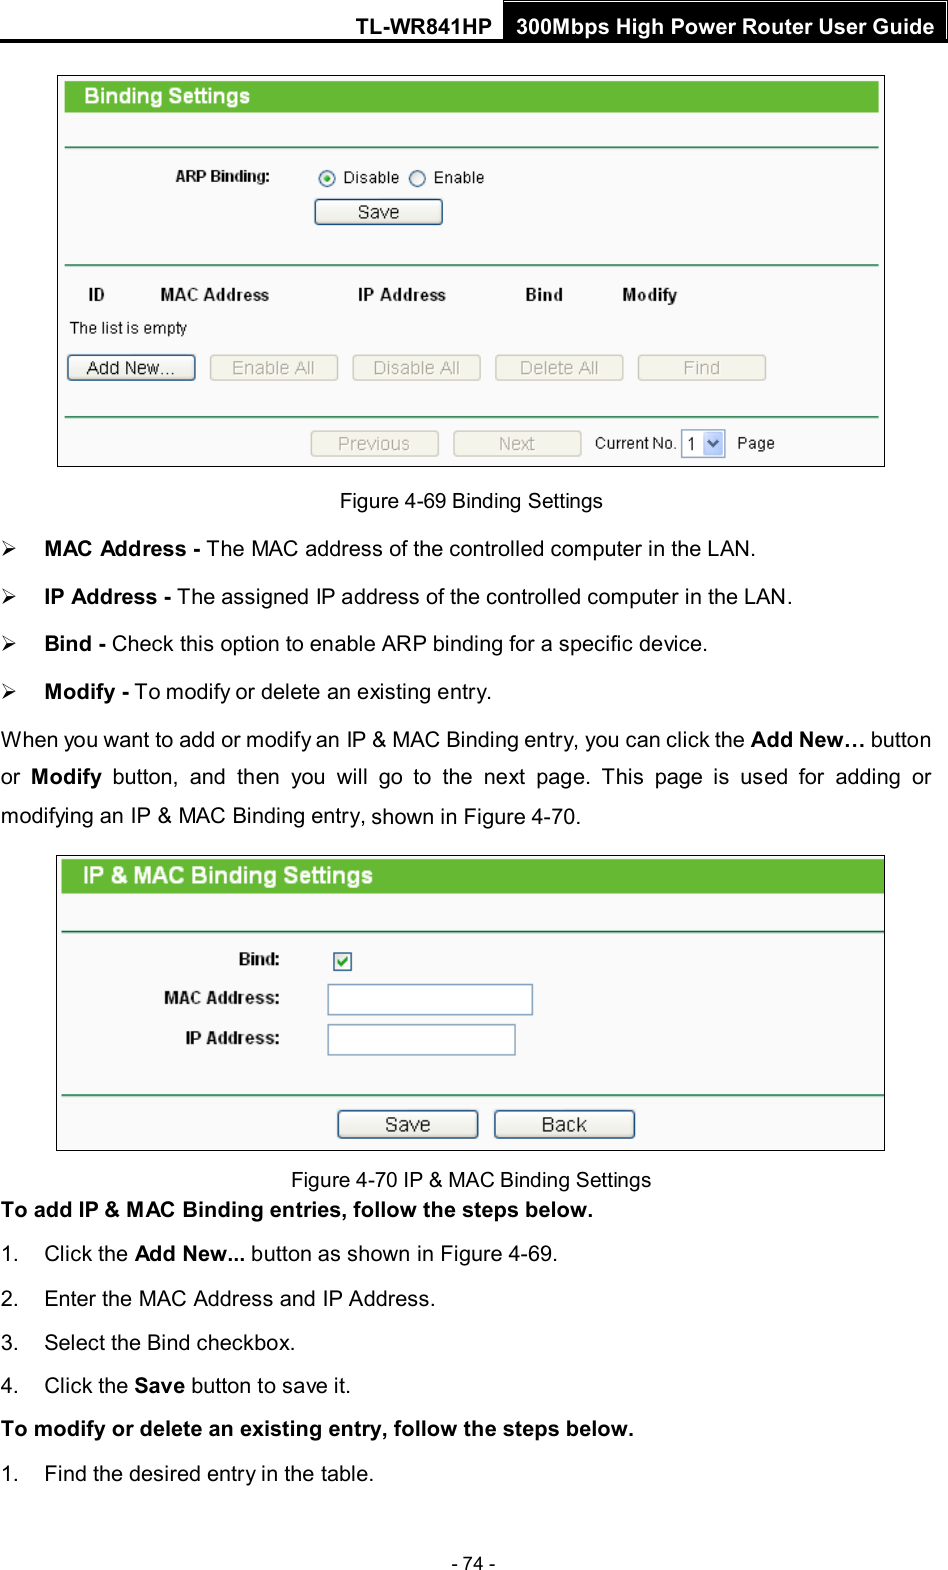 TL-WR841HP 300Mbps High Power Router User Guide  - 74 -  Figure 4-69 Binding Settings  MAC Address - The MAC address of the controlled computer in the LAN.    IP Address - The assigned IP address of the controlled computer in the LAN.    Bind - Check this option to enable ARP binding for a specific device.    Modify - To modify or delete an existing entry.   When you want to add or modify an IP &amp; MAC Binding entry, you can click the Add New… button or  Modify button, and then you will go to the next page. This page is used for adding or modifying an IP &amp; MAC Binding entry, shown in Figure 4-70.    Figure 4-70 IP &amp; MAC Binding Settings To add IP &amp; MAC Binding entries, follow the steps below. 1. Click the Add New... button as shown in Figure 4-69.   2. Enter the MAC Address and IP Address. 3. Select the Bind checkbox.   4. Click the Save button to save it. To modify or delete an existing entry, follow the steps below. 1. Find the desired entry in the table.   